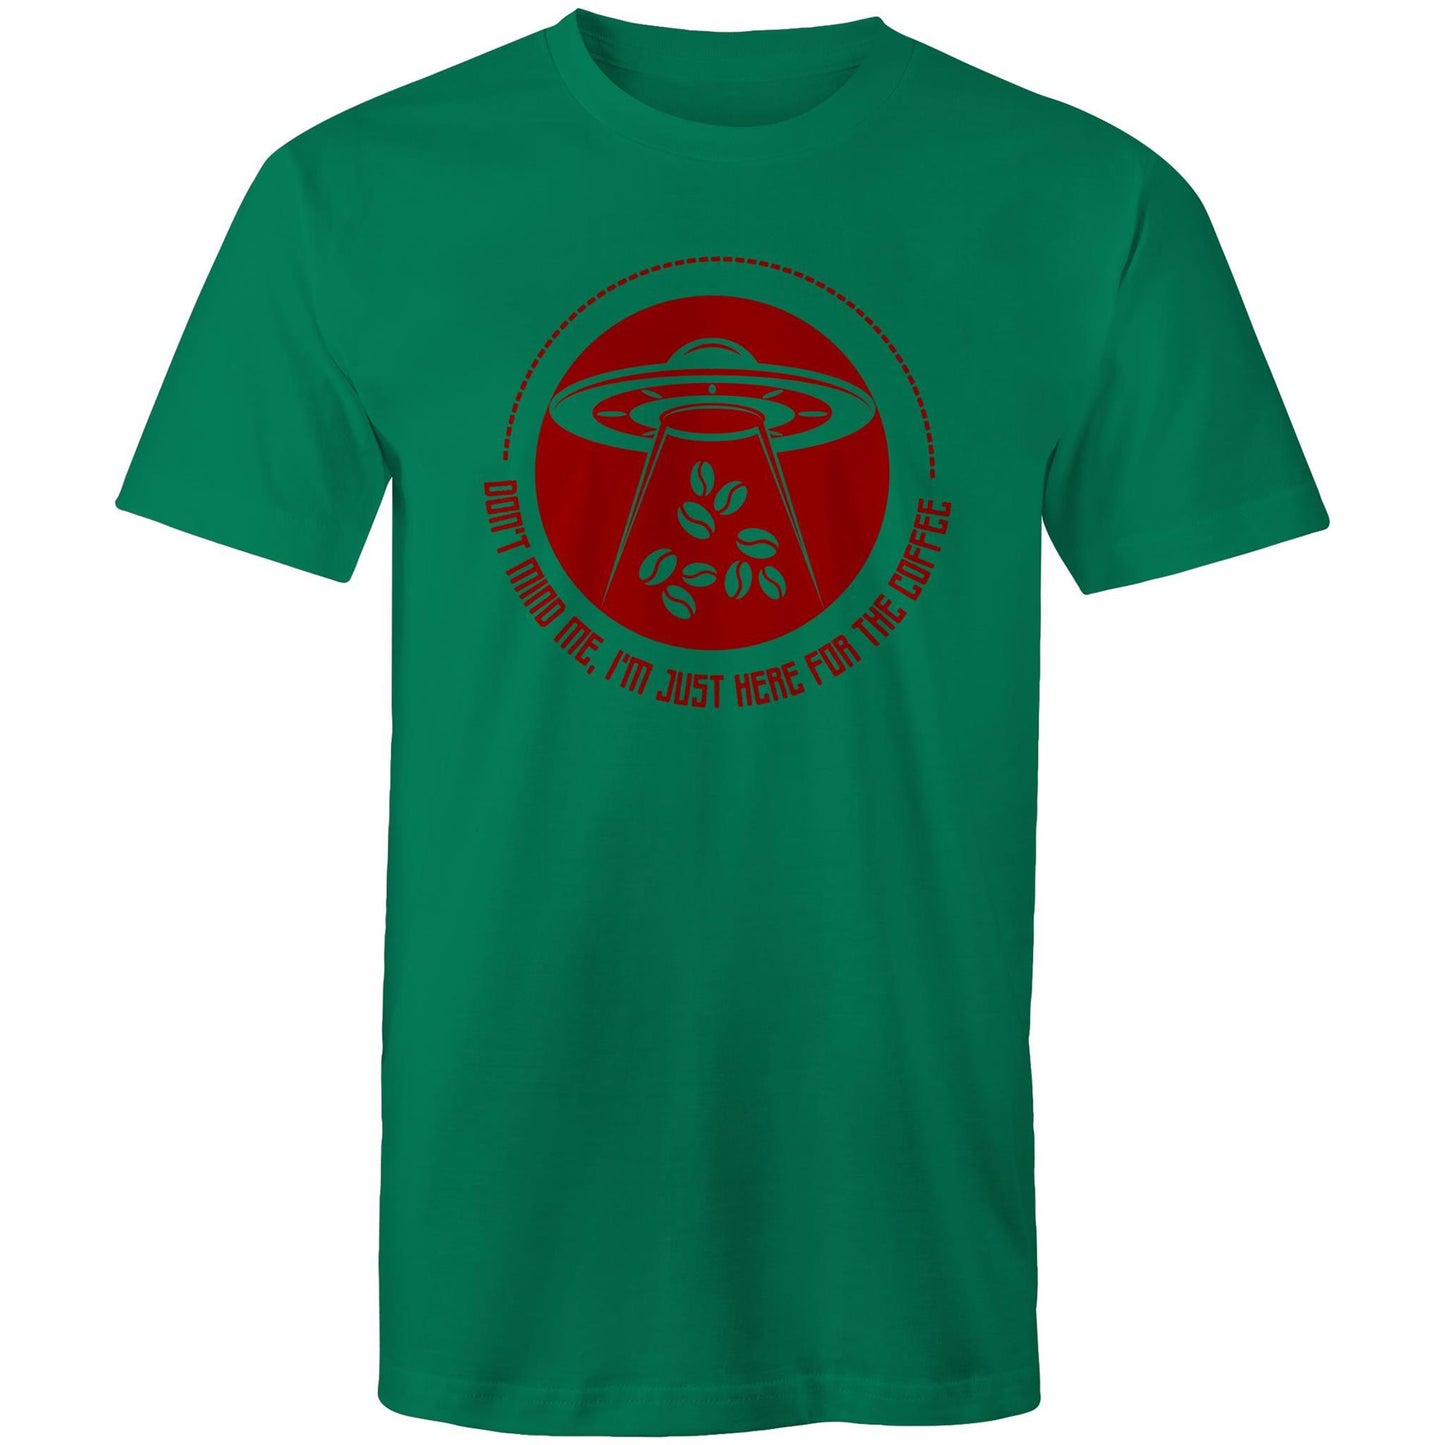 Don't Mind Me, I'm Just Here For The Coffee, Alien UFO - Mens T-Shirt Kelly Green Mens T-shirt Coffee Sci Fi